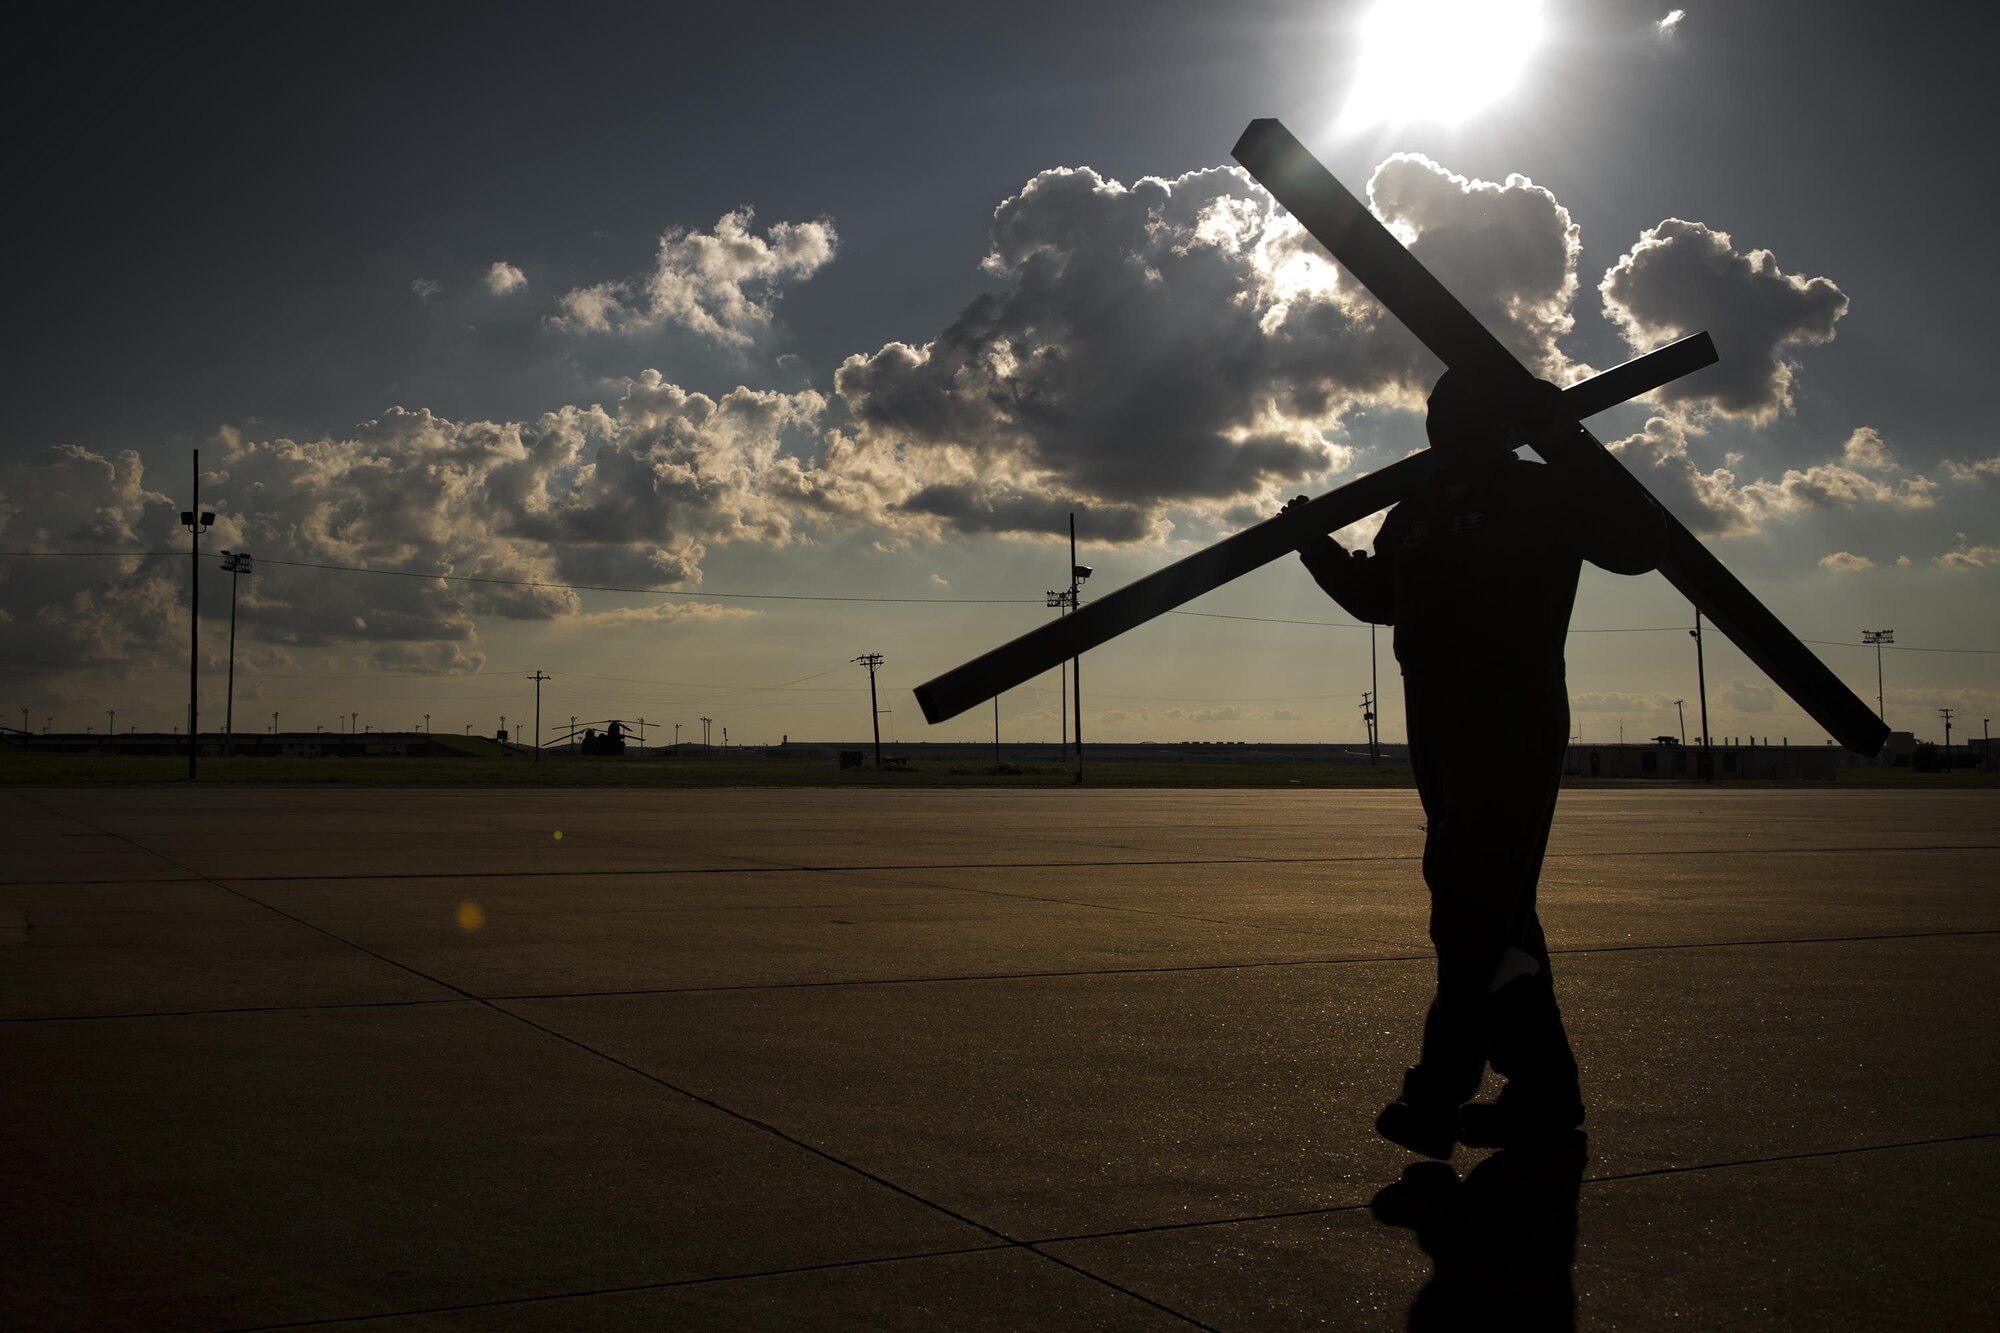 Master Sgt. Mario McBride, 71st Rescue Squadron loadmaster, carries pallet supports across the flightline prior to a sortie in support of Hurricane Harvey relief efforts, Aug. 28, 2017, at Naval Air Station Fort Worth Joint Reserve Base, Texas. The 347th Rescue Group from Moody Air Force Base, Ga. sent aircraft and personnel in support of Air Forces Northern as part of Northern Command's support of FEMA's disaster response efforts. (U.S. Air Force photo by Staff Sgt. Ryan Callaghan)